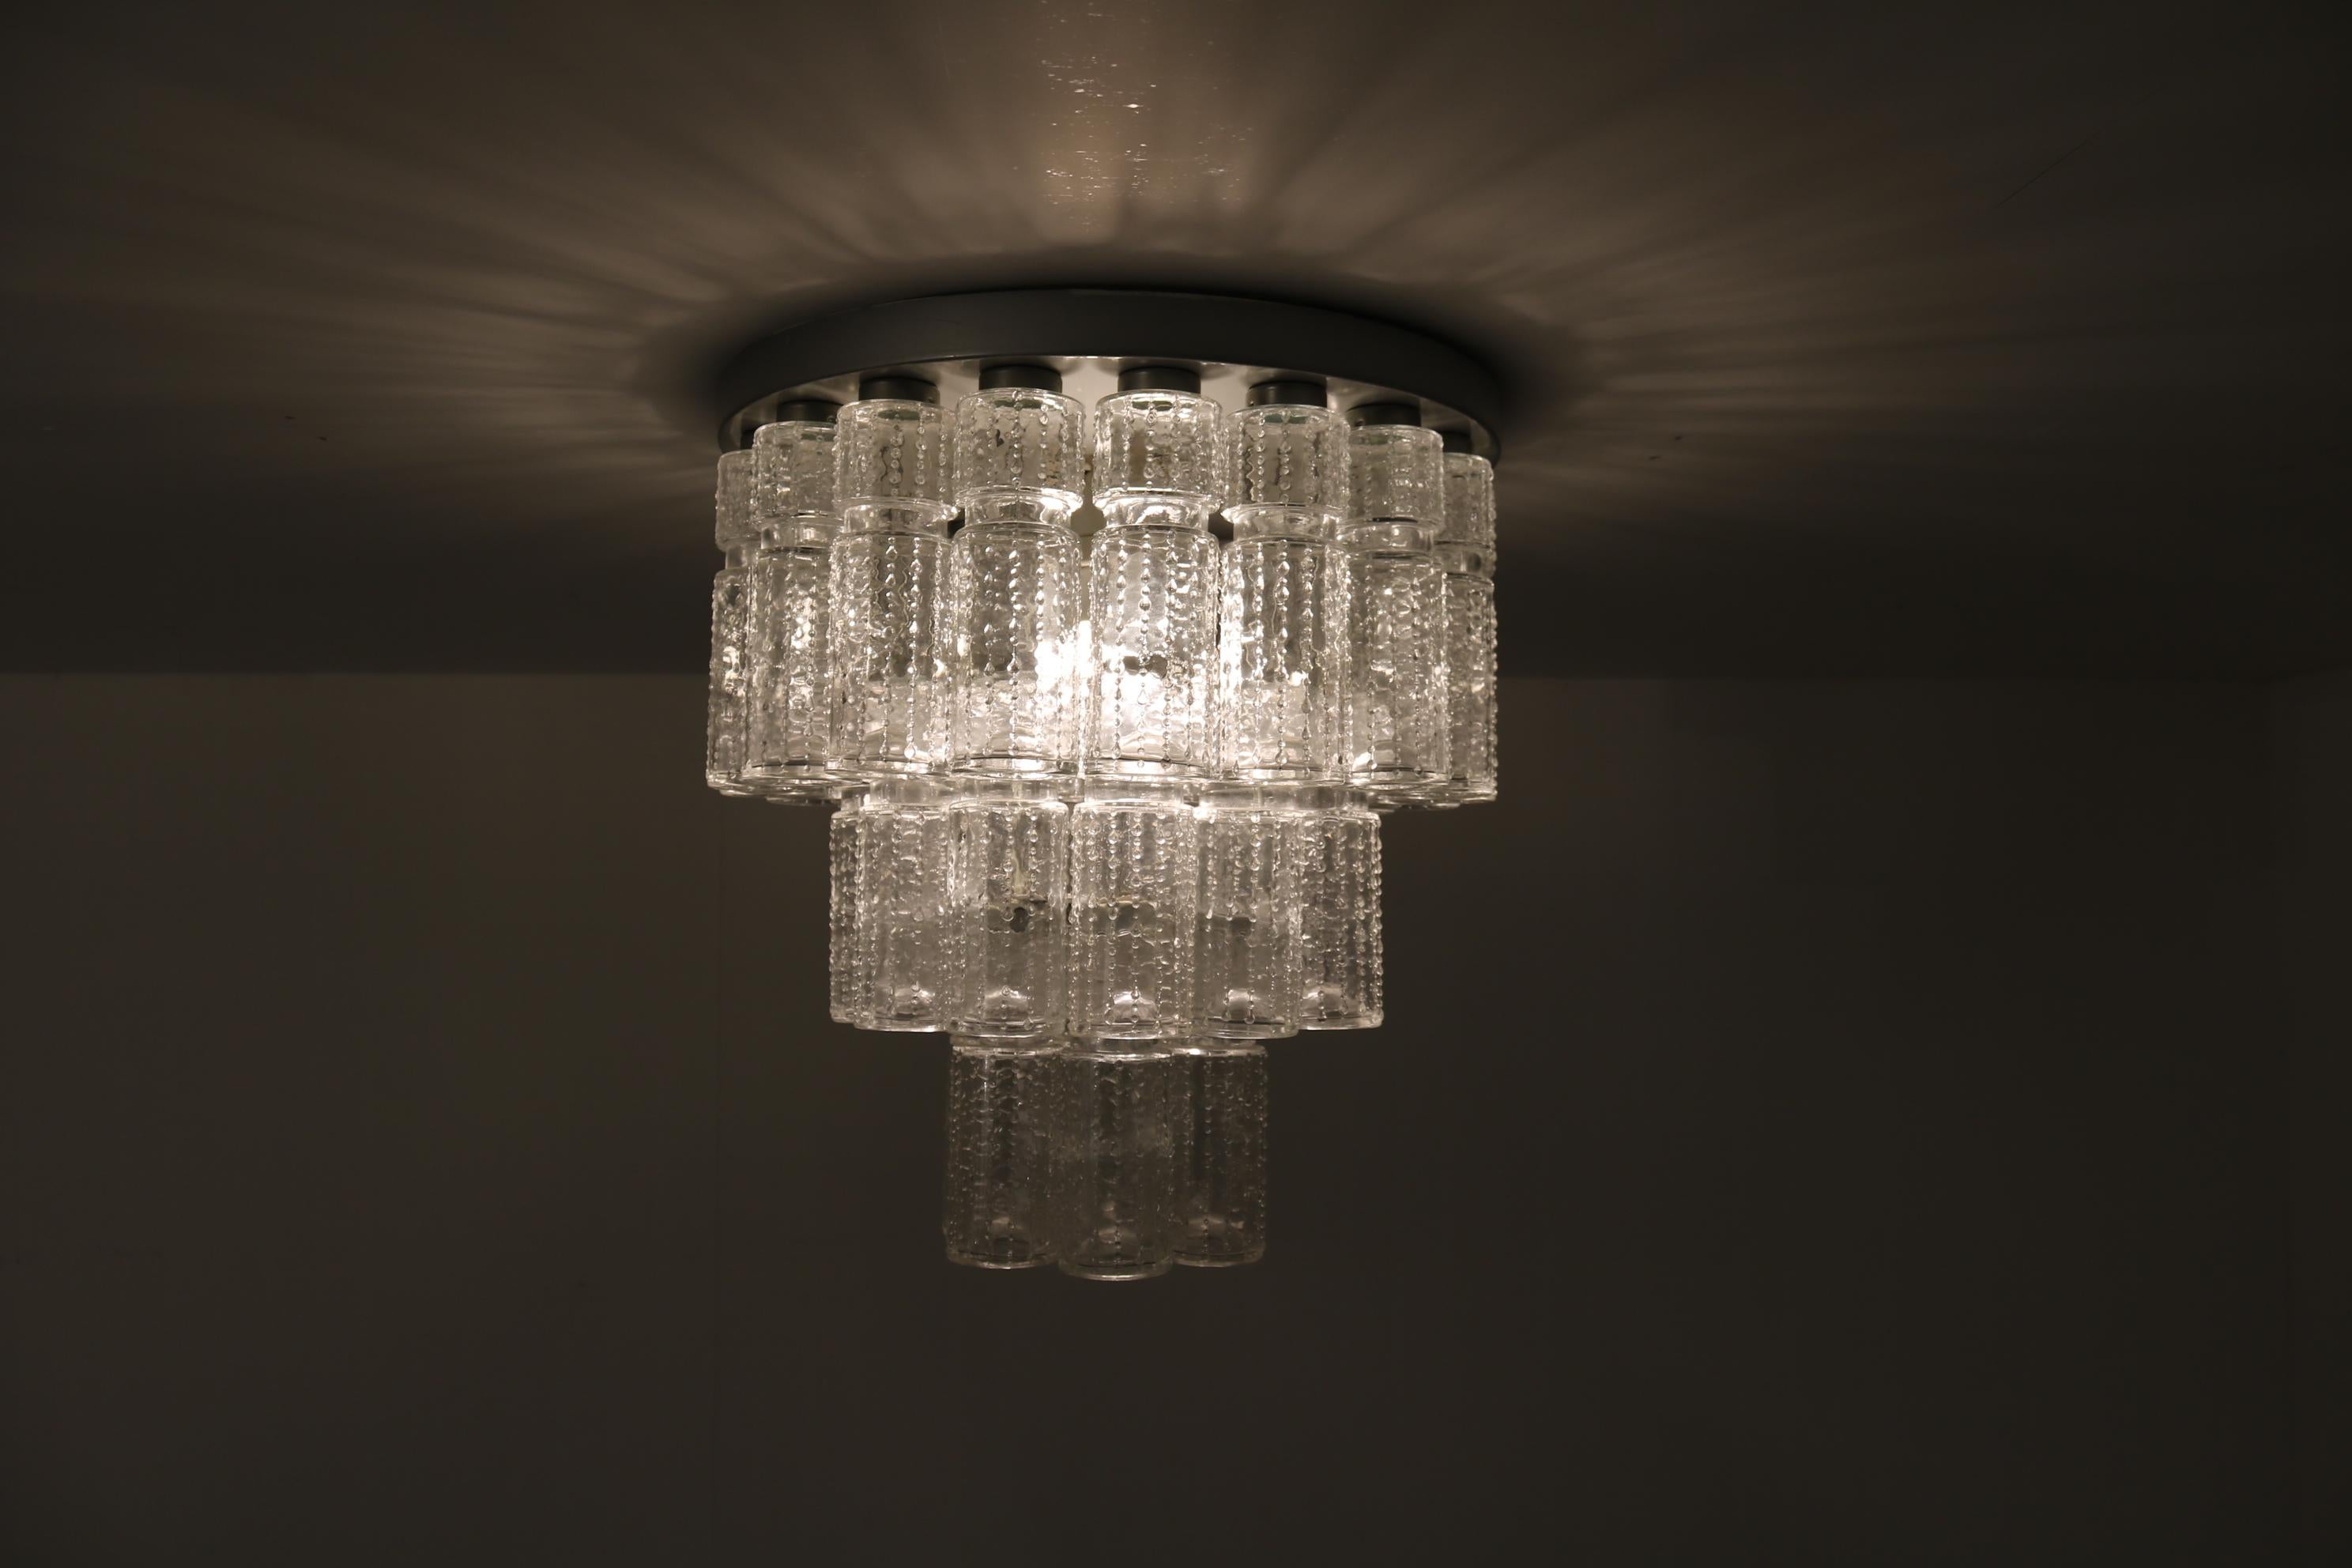 A very elegant ceiling lamp, manufactured by RAAK in the Netherlands circa 1960.

This eye-catching piece has a round aluminium base on which many clear glass cylinders hanging down in different heights. This gives the piece an icicle-like style